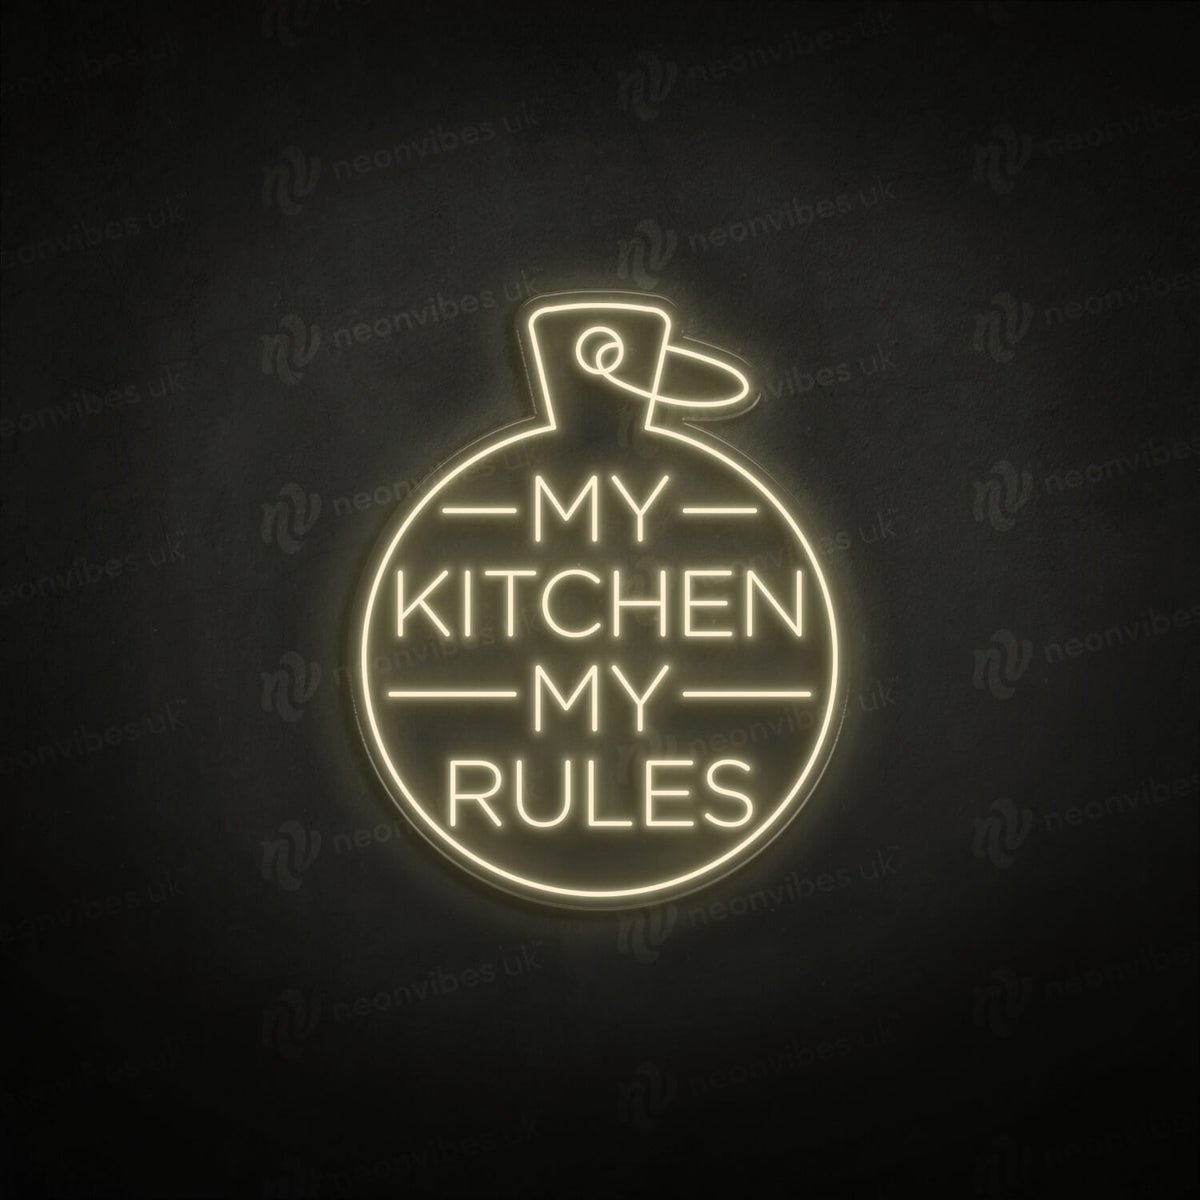 My Kitchen My Rules neon sign